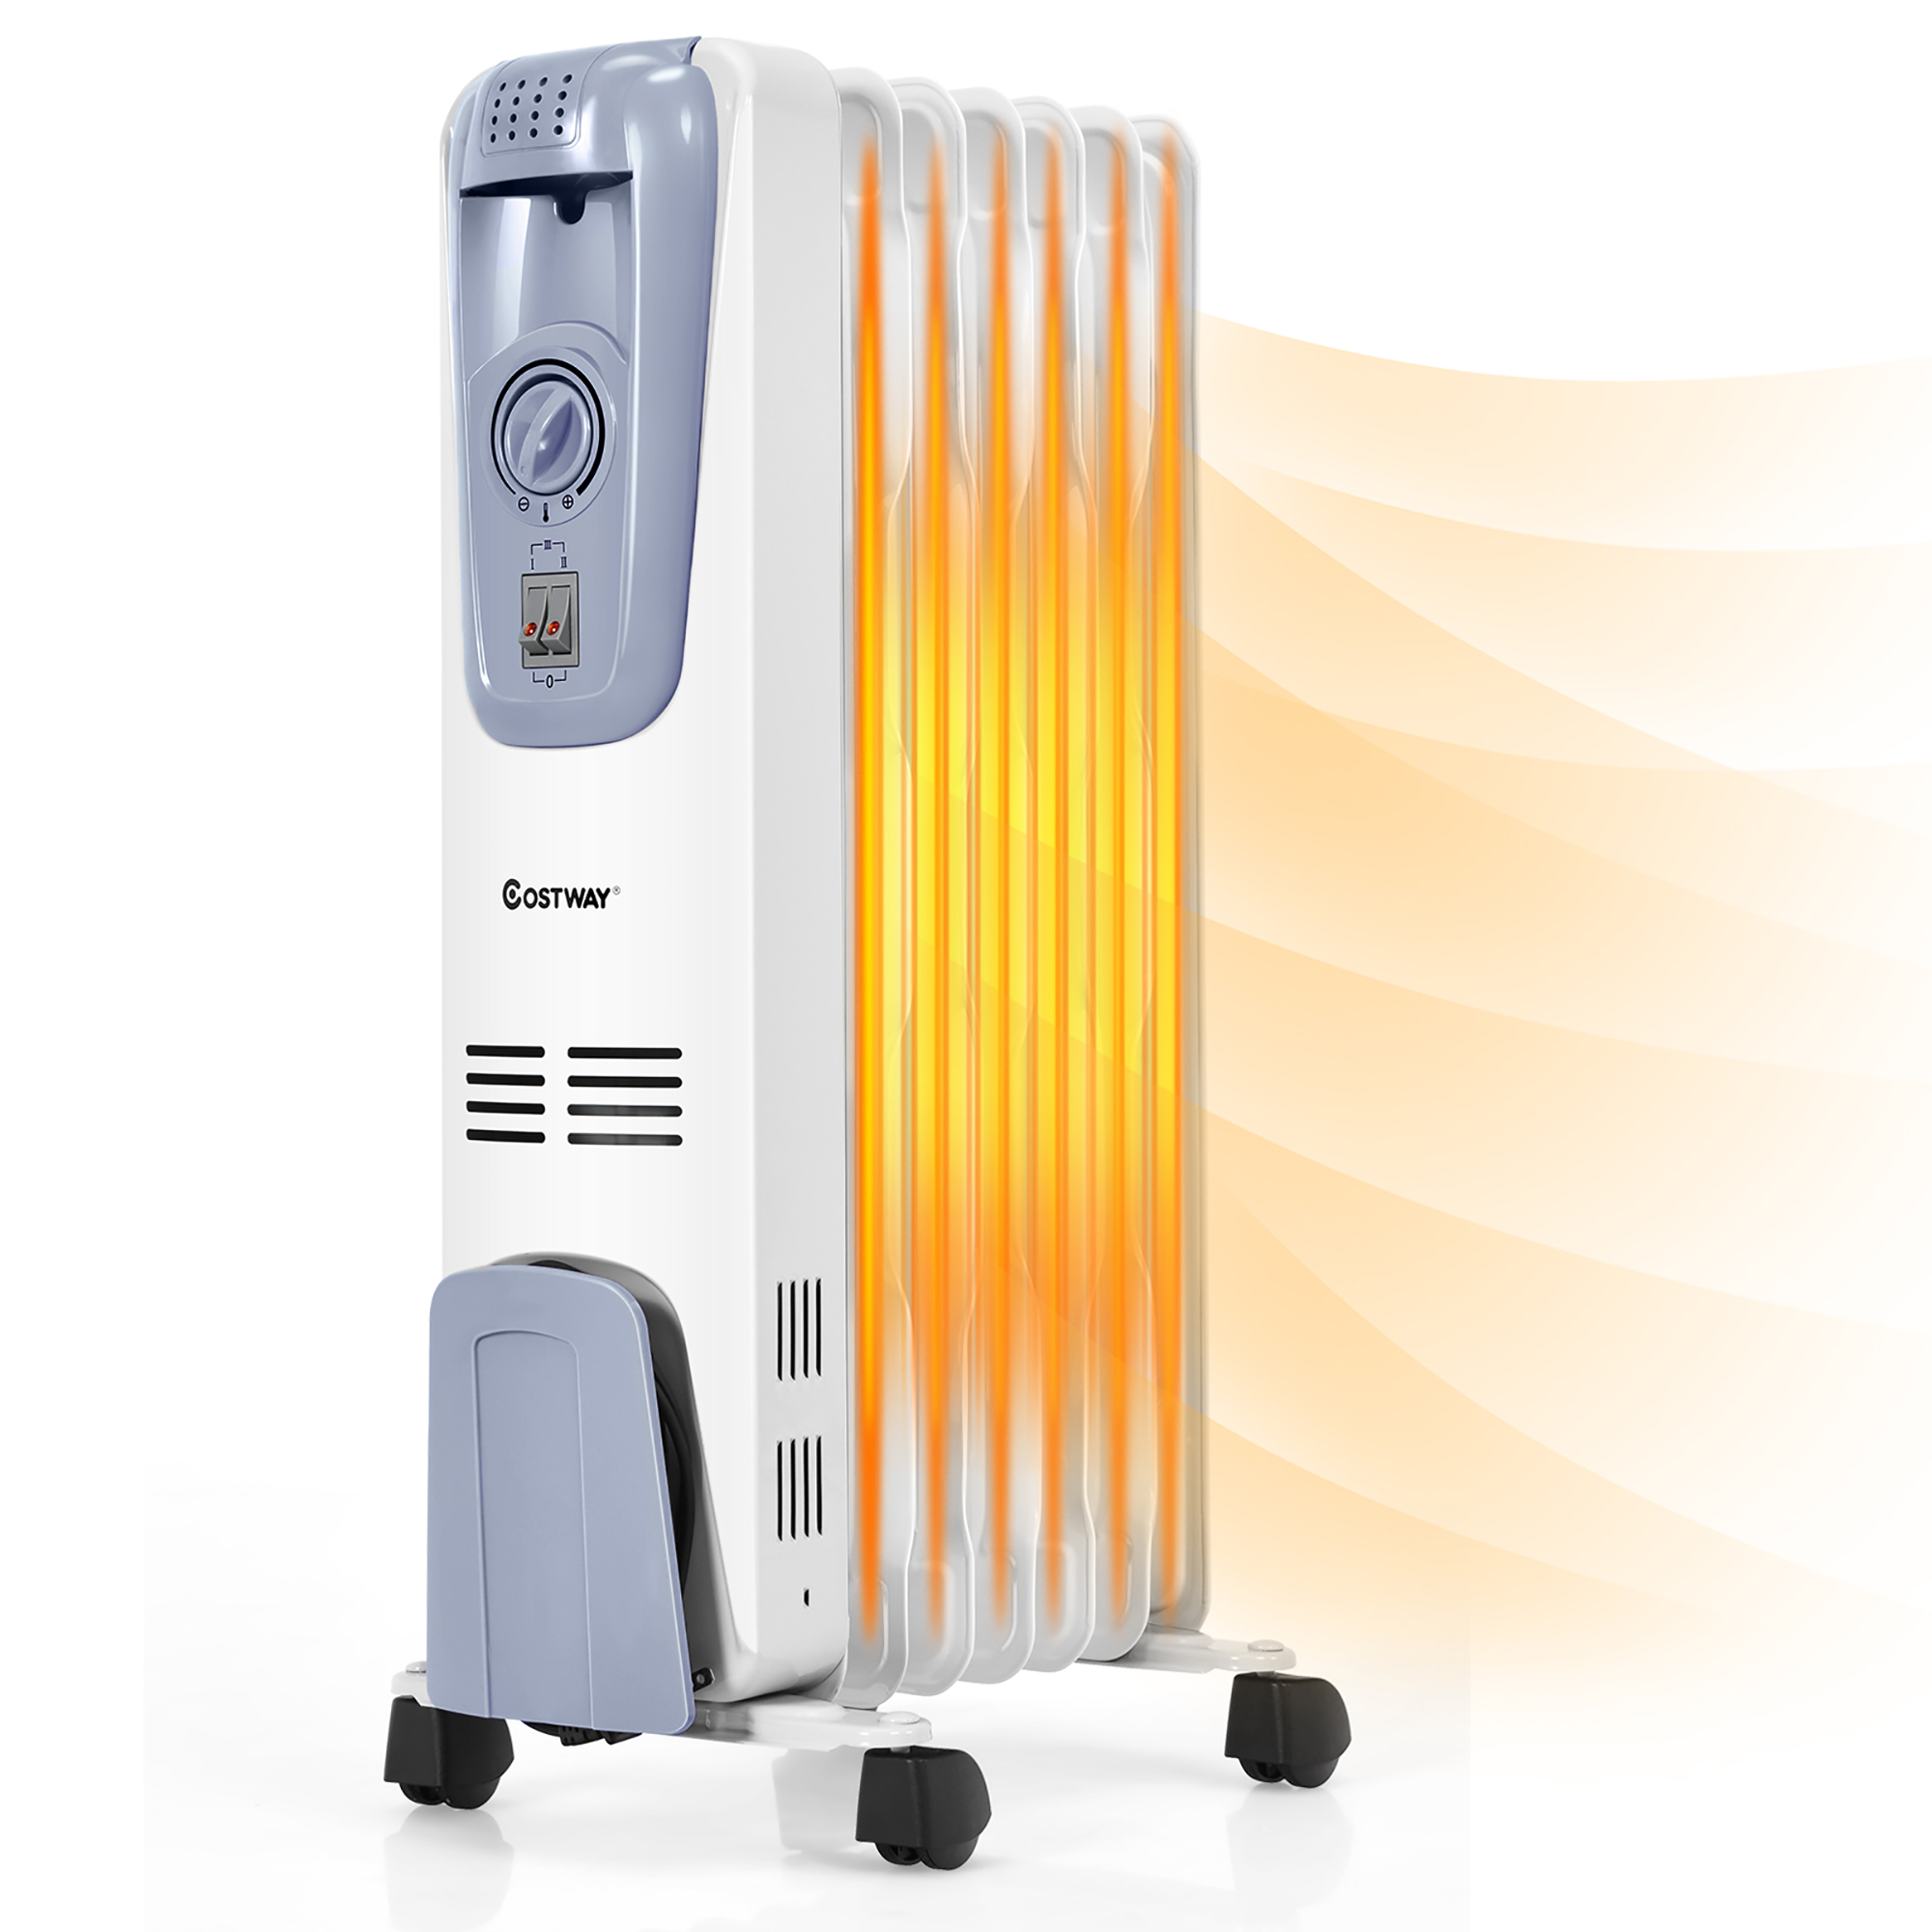 Costway 1500W Electric Oil Filled Radiator Space Heater 7-Fin Thermostat Room Radiant - image 1 of 9